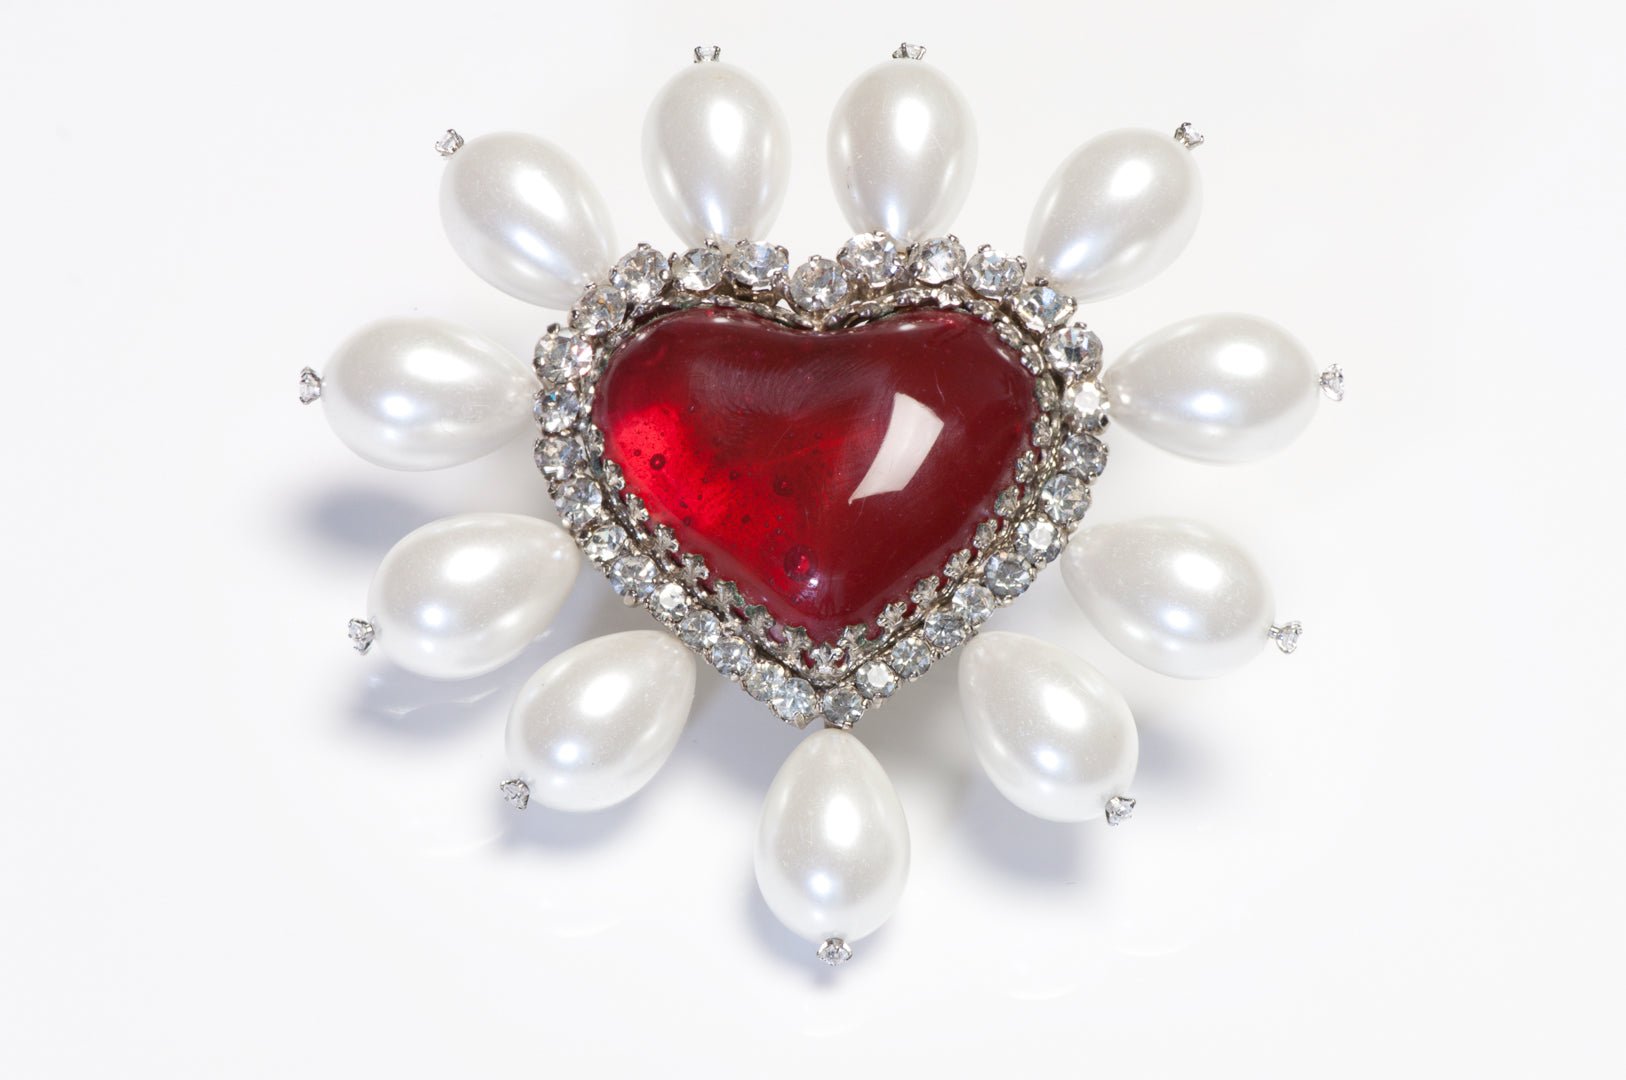 Christian Dior Paris Couture 1950’s Maison Gripoix Red Glass Pearl Heart Brooch